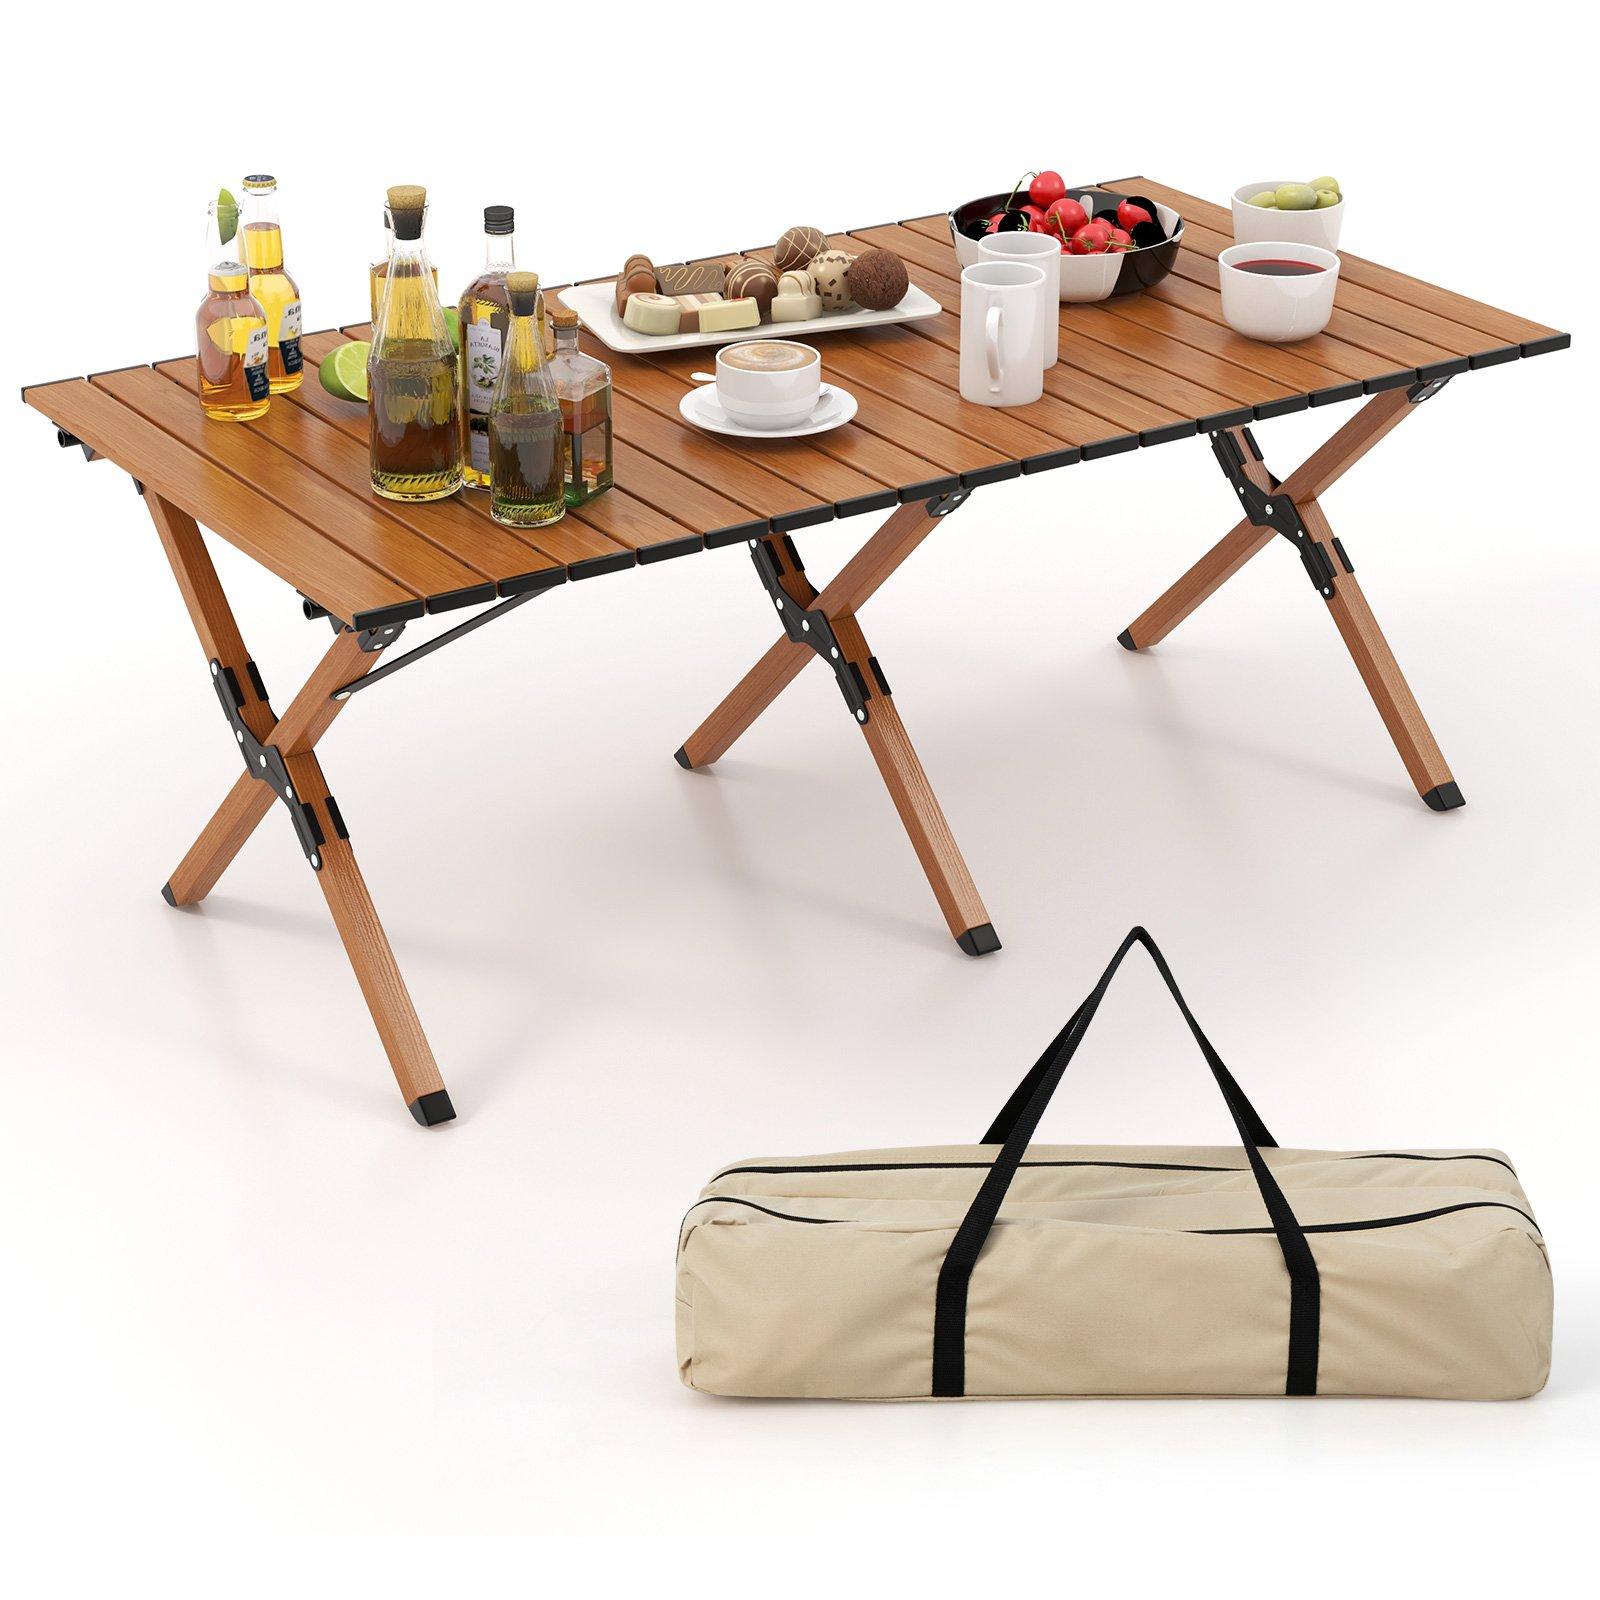 Folding Picnic Table Roll-Up Camping Table Portable Outdoor Table w/ Carry Bag